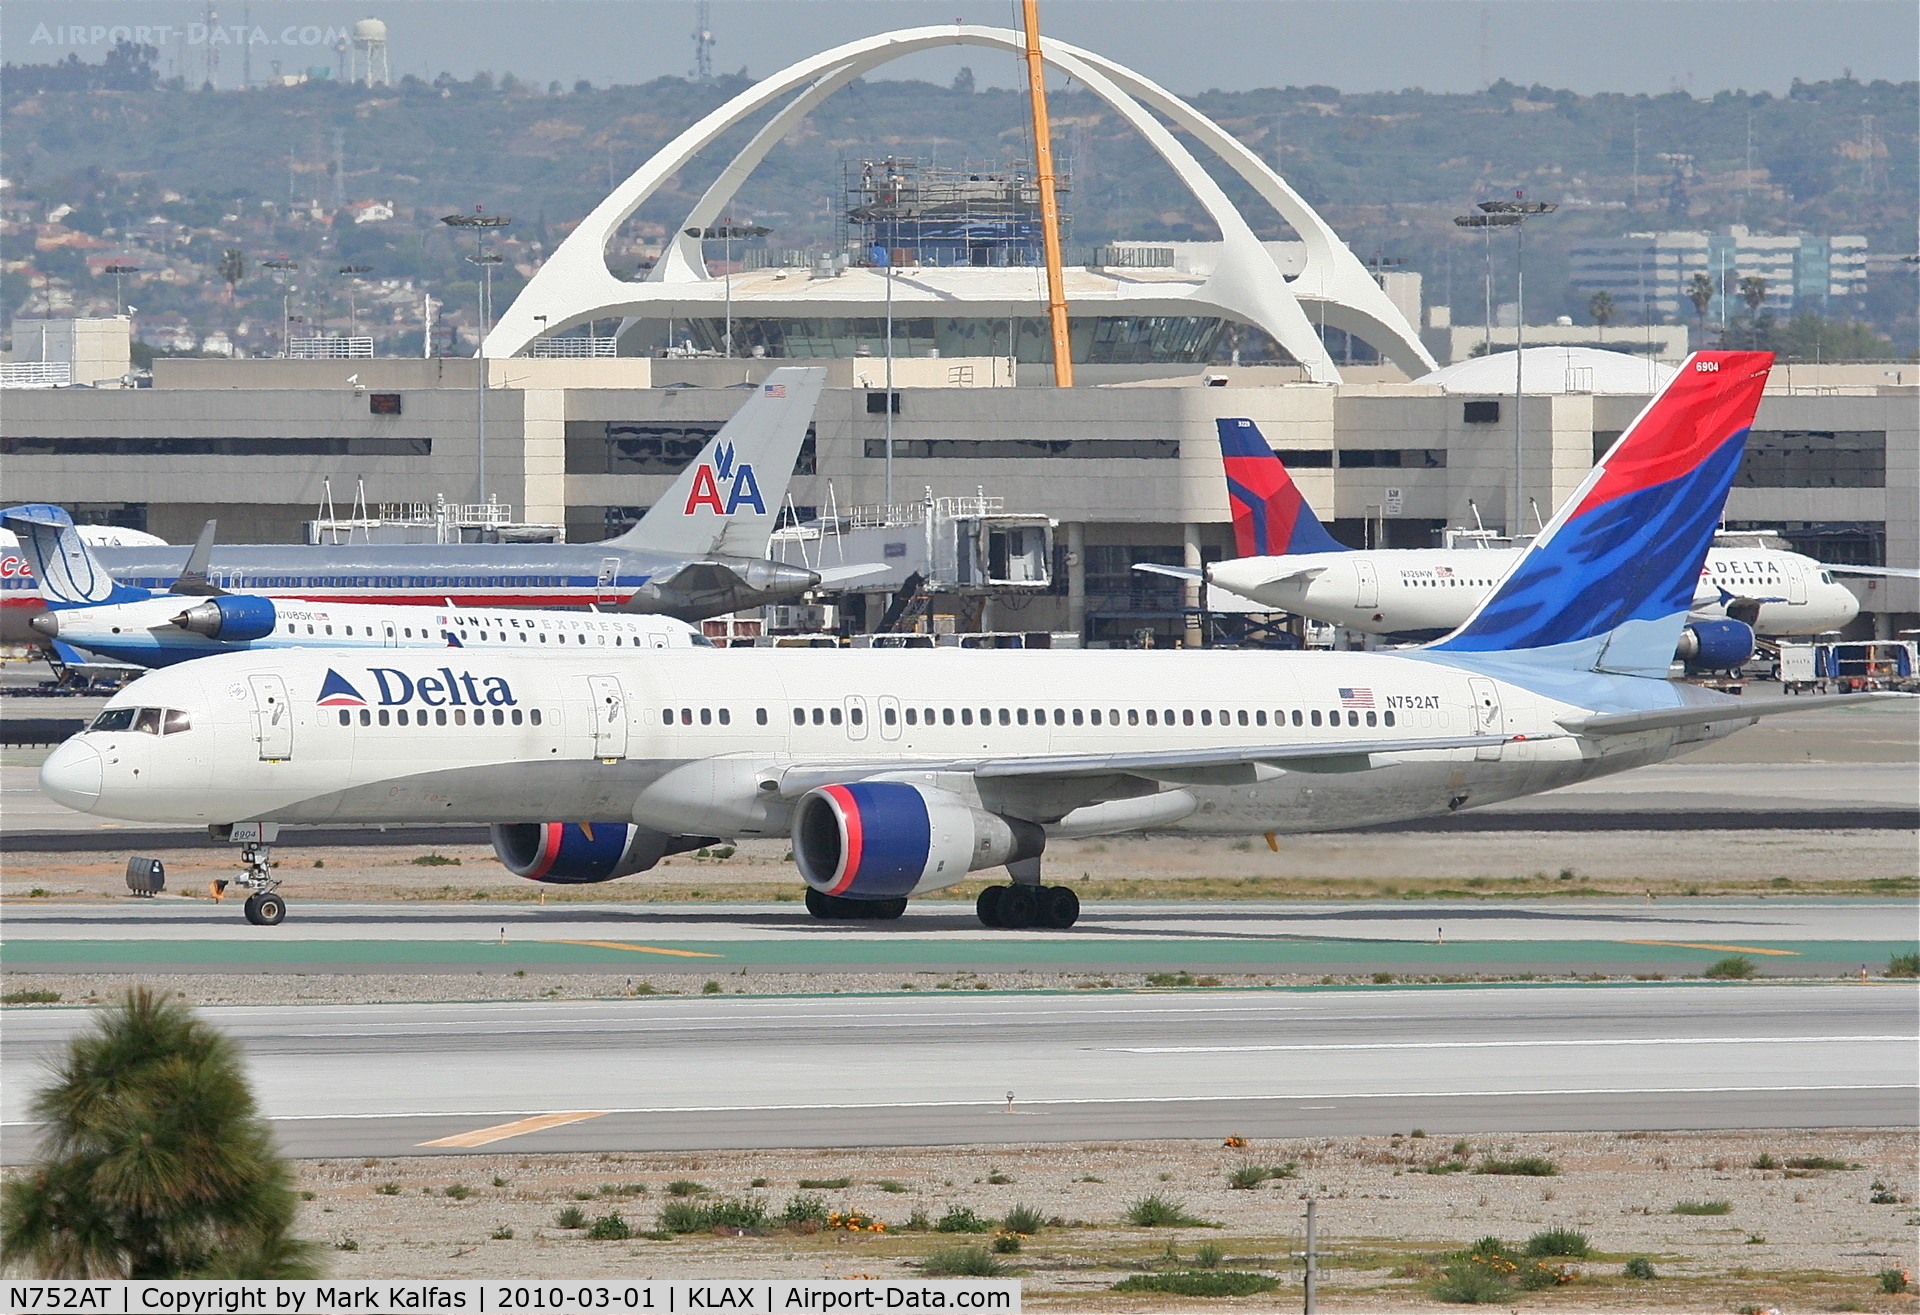 N752AT, 1984 Boeing 757-212 C/N 23128, Delta Airlines Boeing 757-232, N752AT, DAL1735 arriving from KSLC, taxiway hotel KLAX.